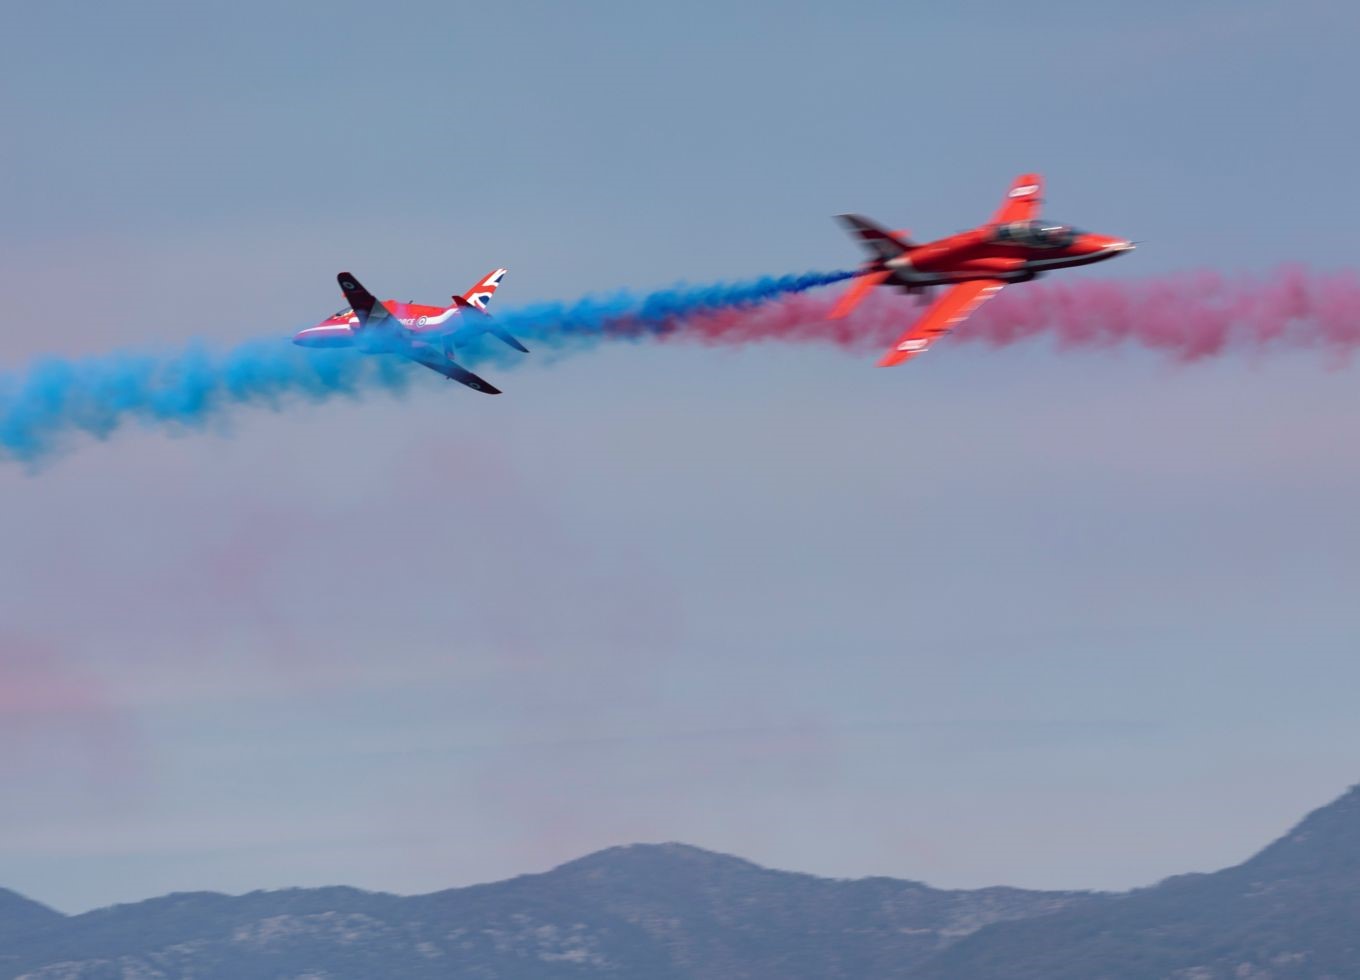 Two Red Arrows with blue and red trails.